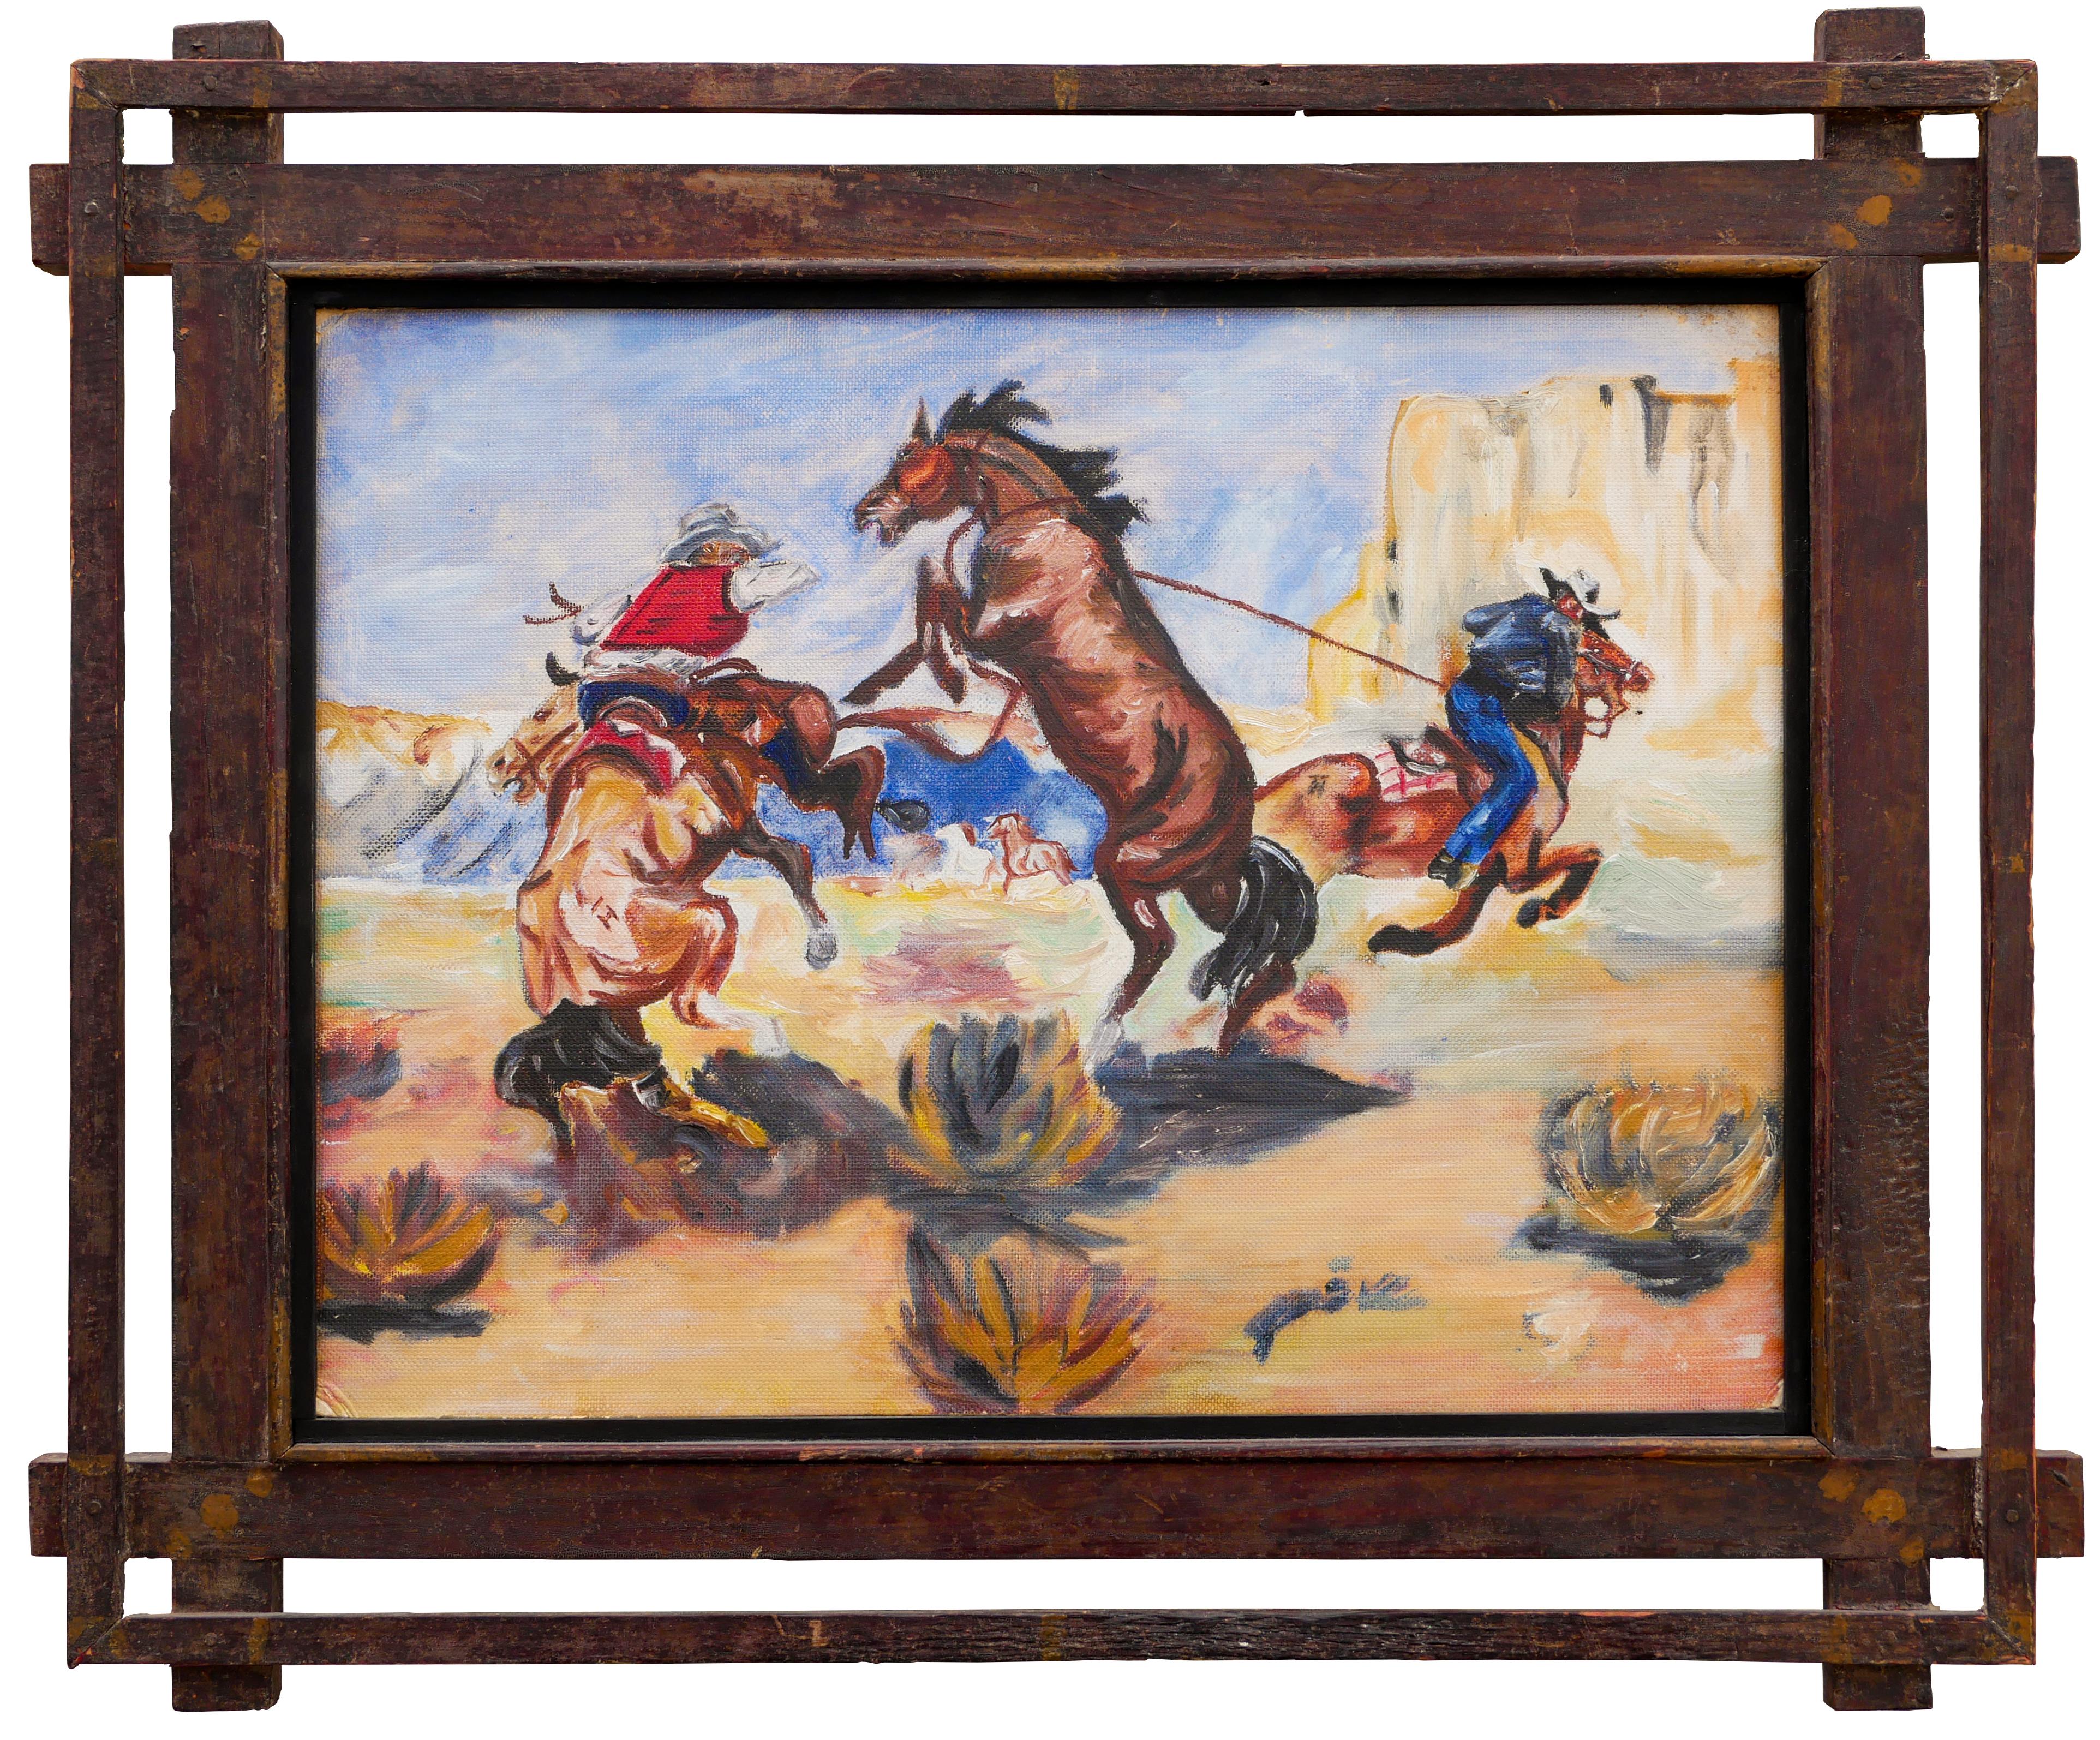 Unknown Animal Painting - Blue, Yellow, and Brown Abstract Figurative Horse Chase Western Landscape 